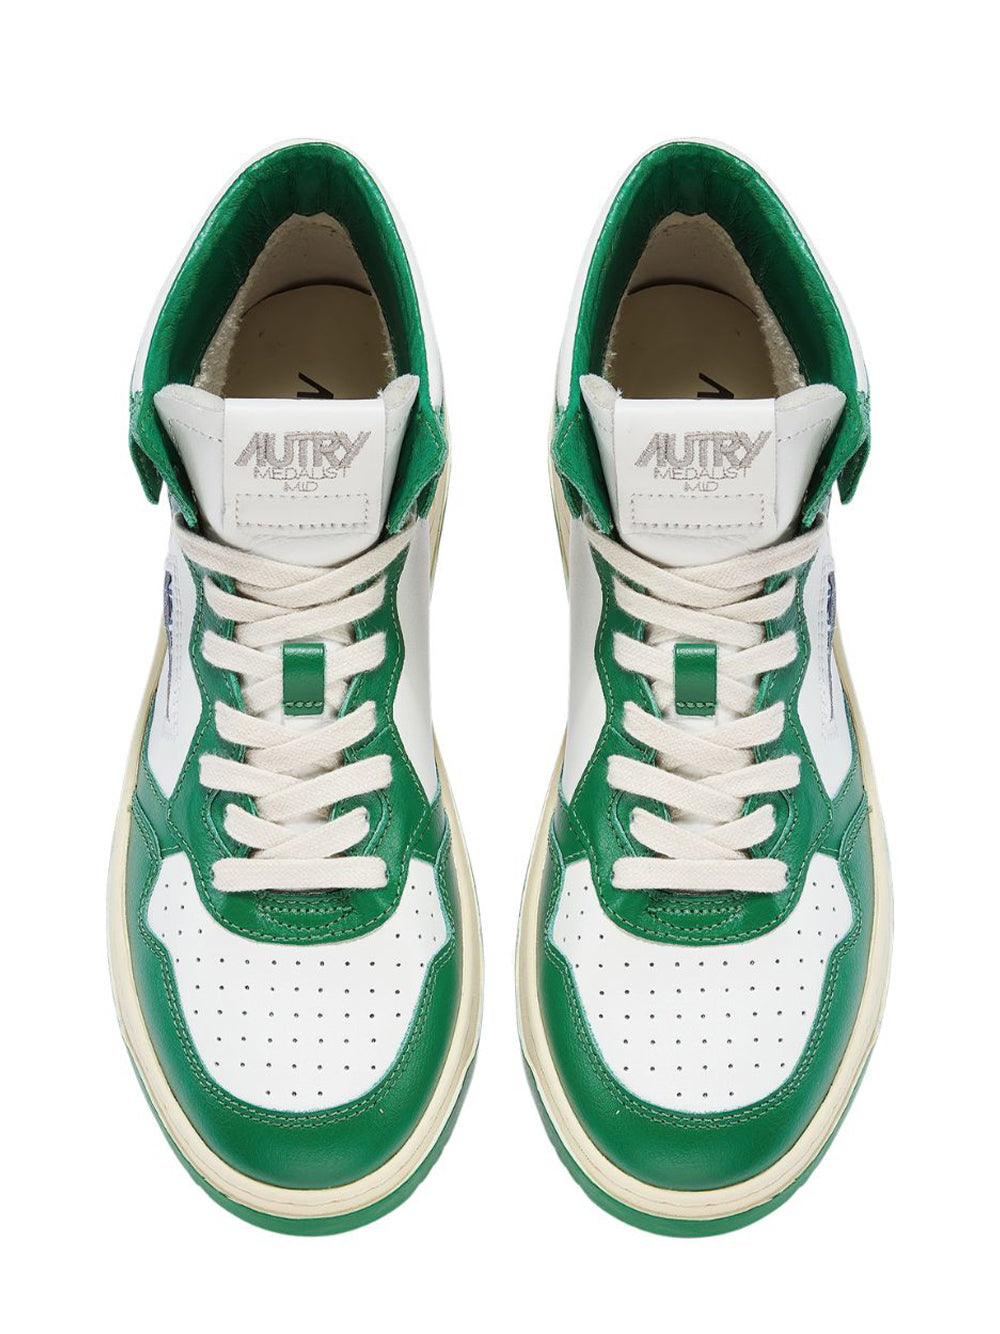 Medalist Mid Sneakers In Two-Tone Leather (White And Green) (Women)